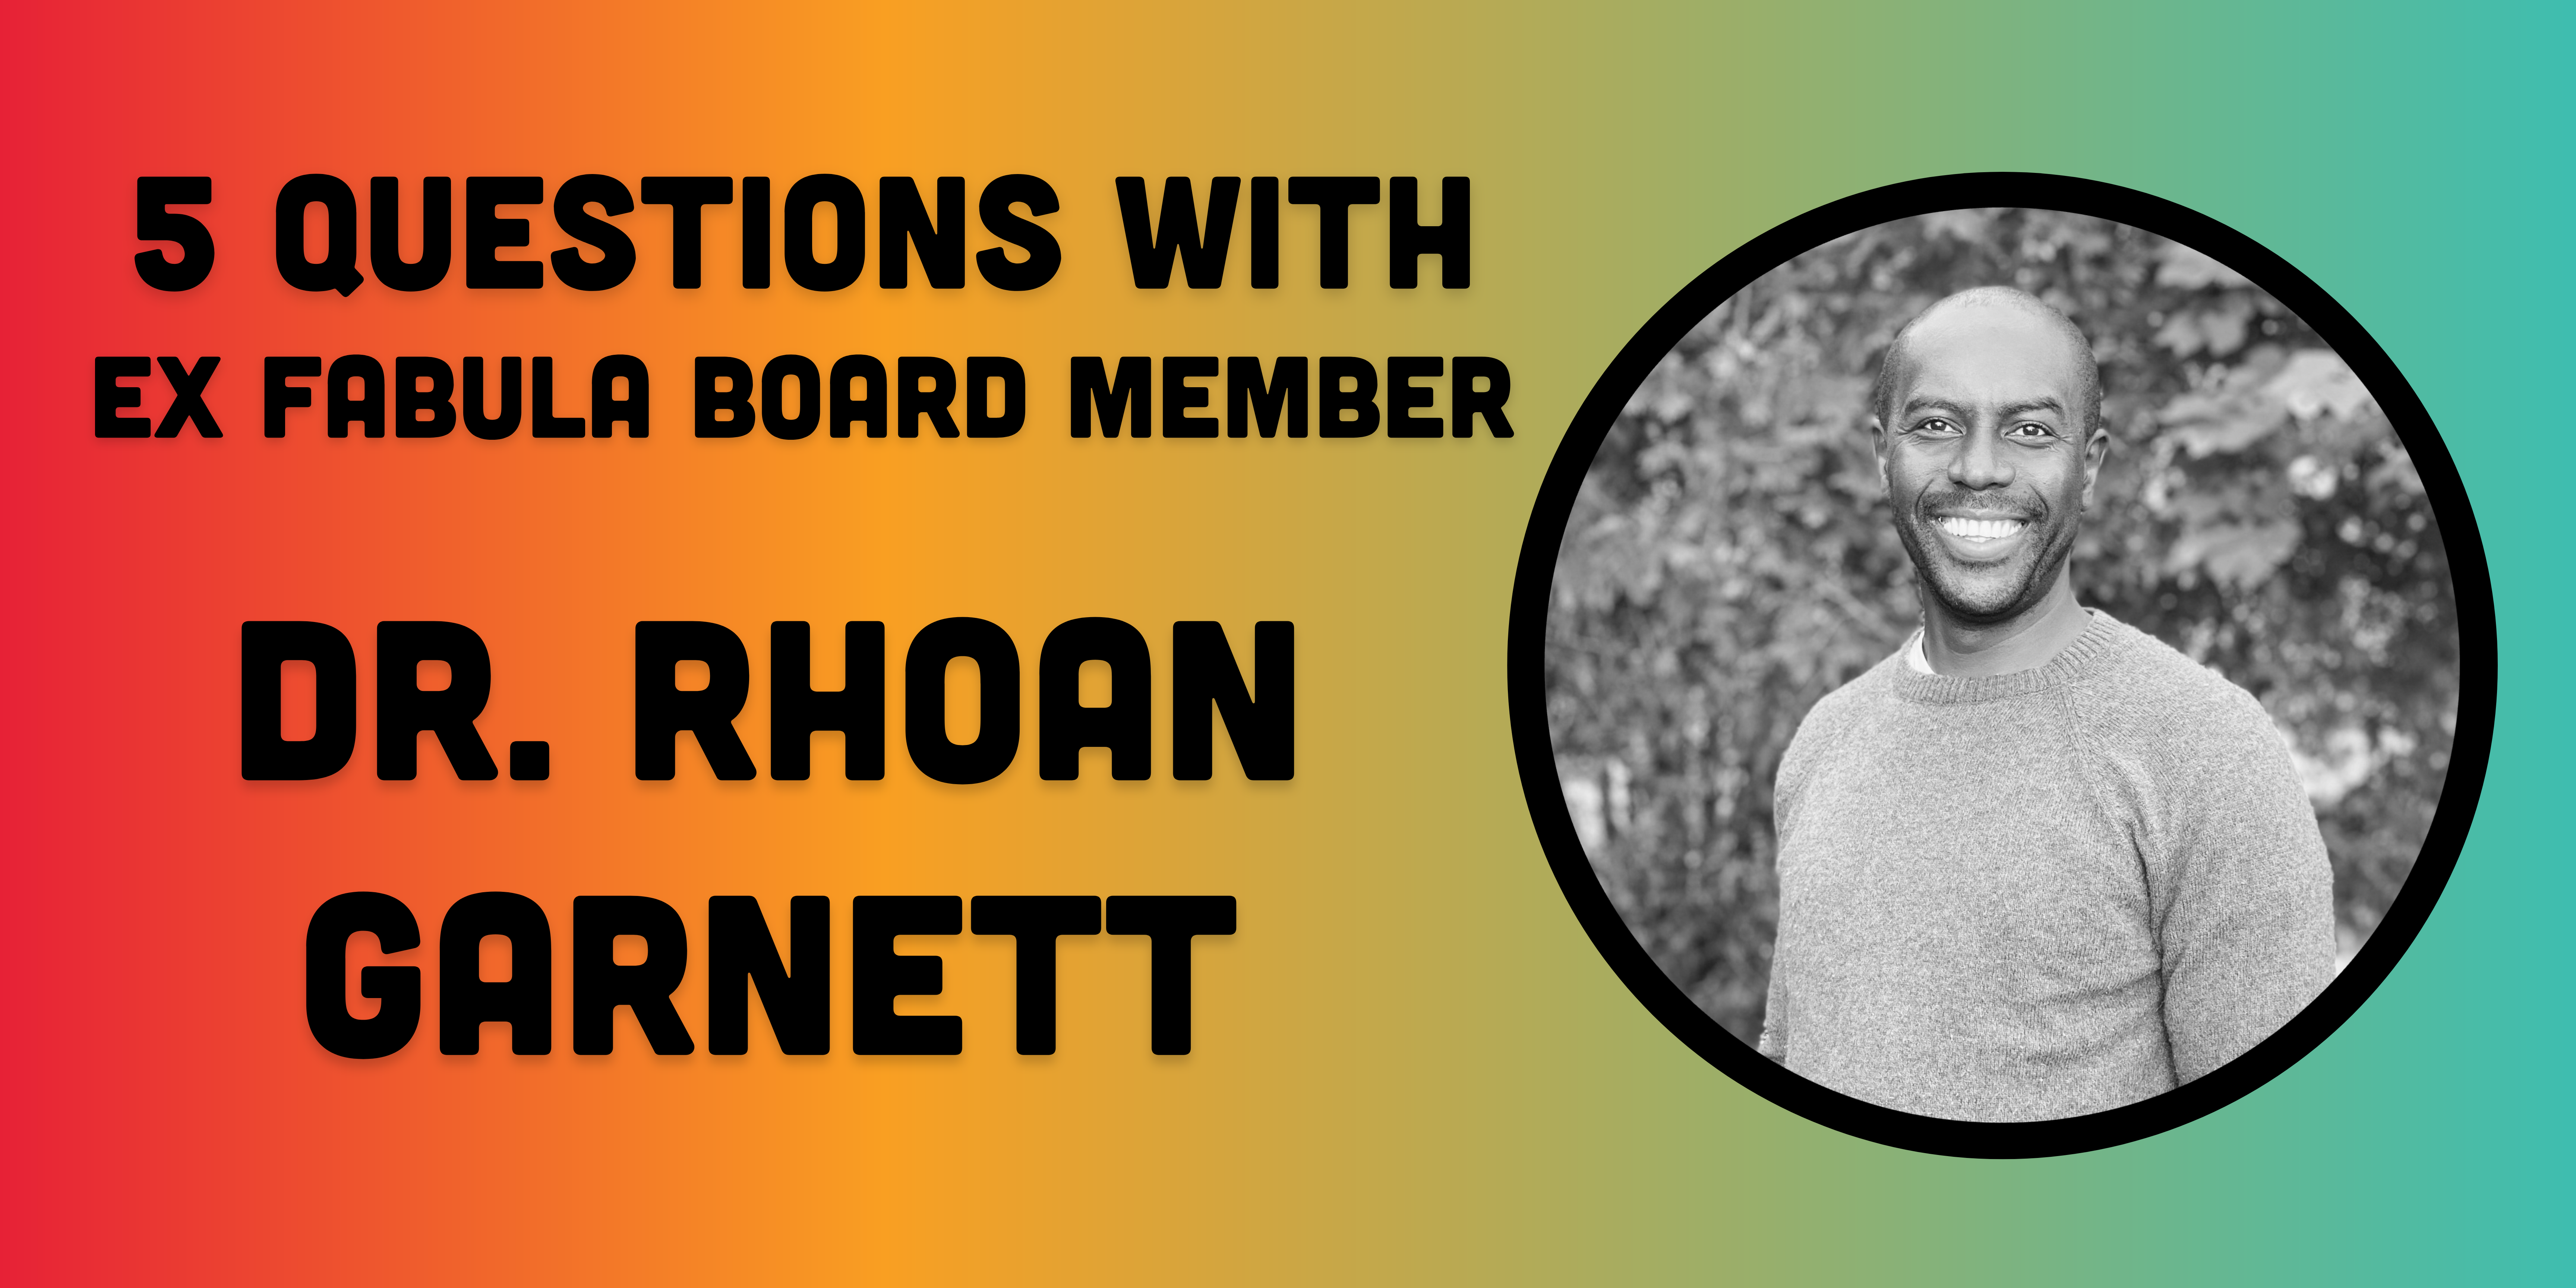 5 questions with Ex Fabula board member Dr. Rhoan Garnett. Black text on rainbow gradient background, black and white headshot of Rhoan on right